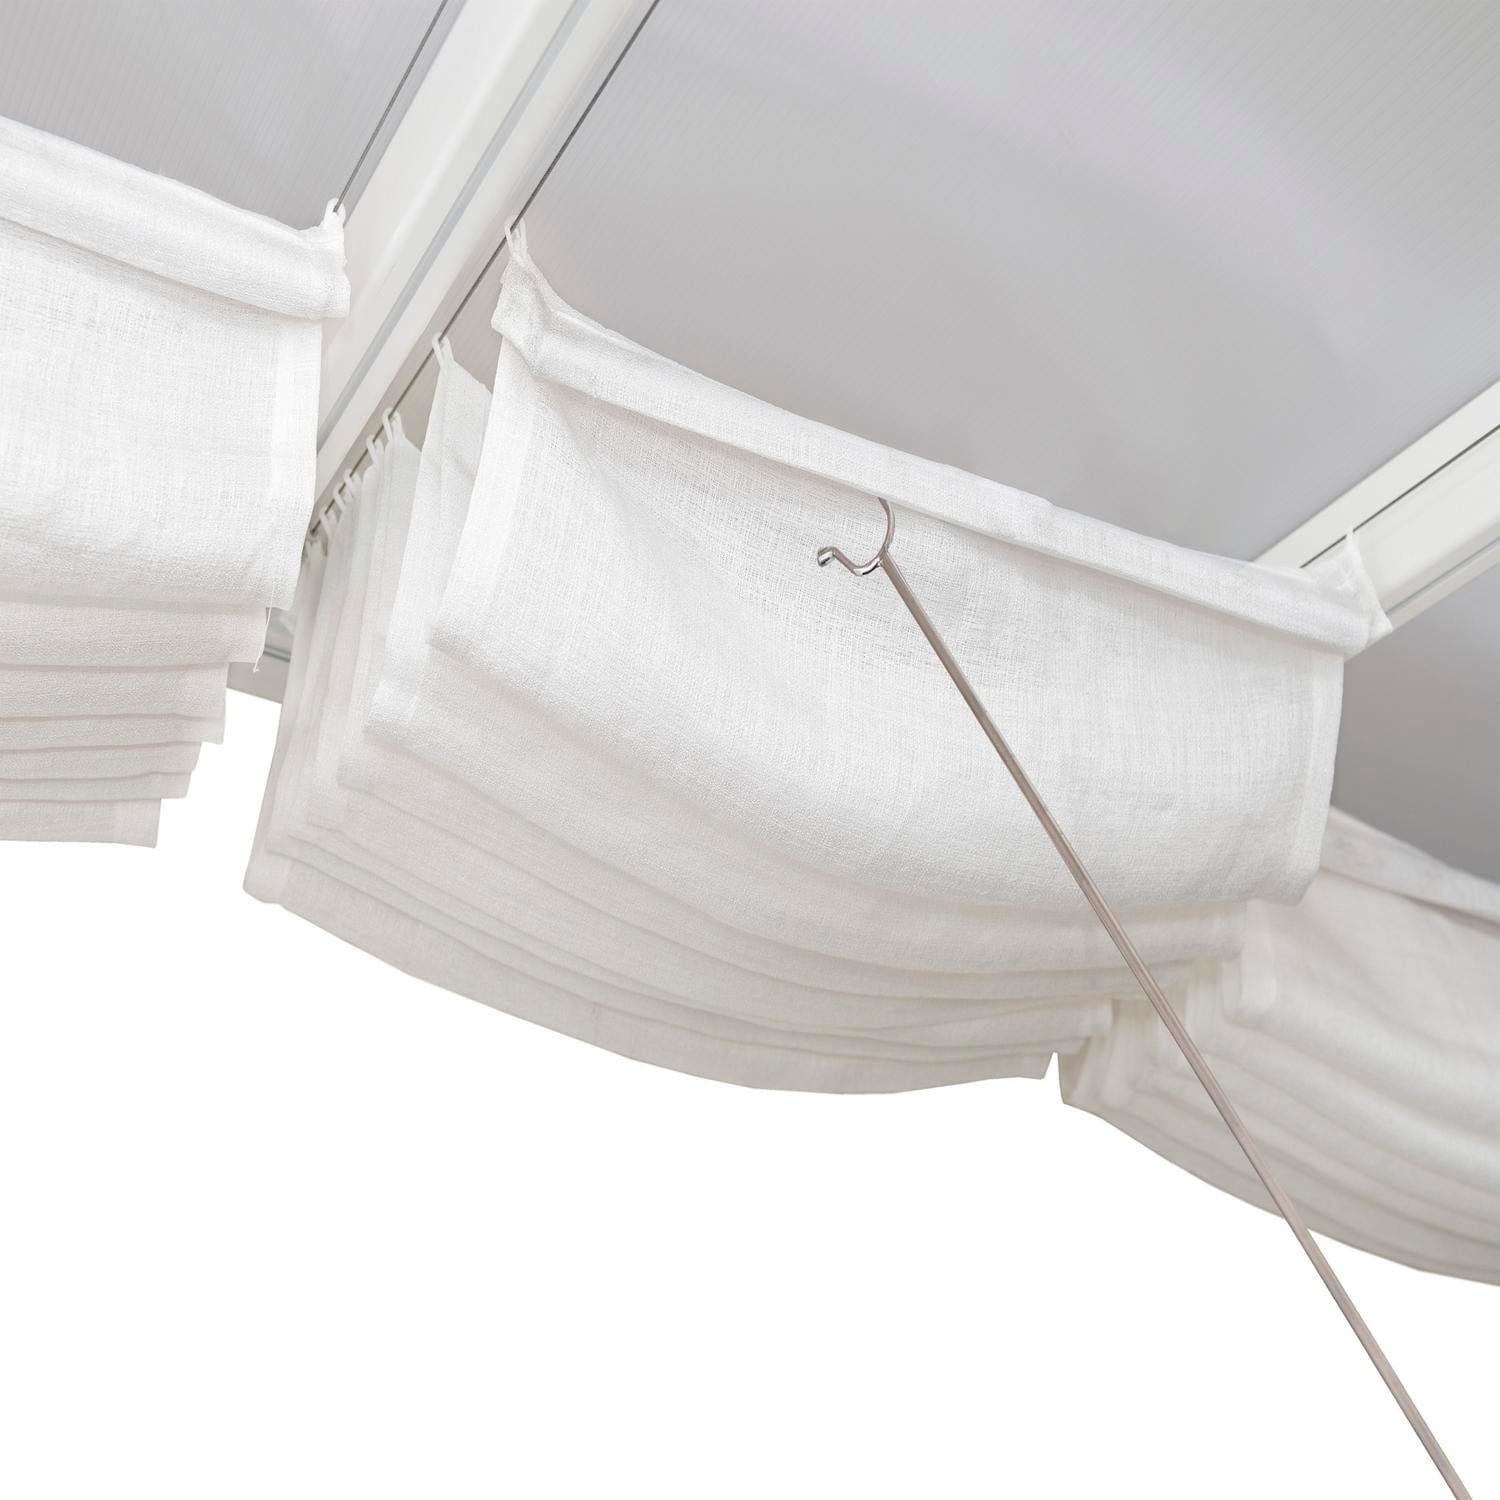 Palram - Canopia Patio Cover Accessories Palram - Canopia | Patio Cover Blinds 10x24 ft - White HG1075